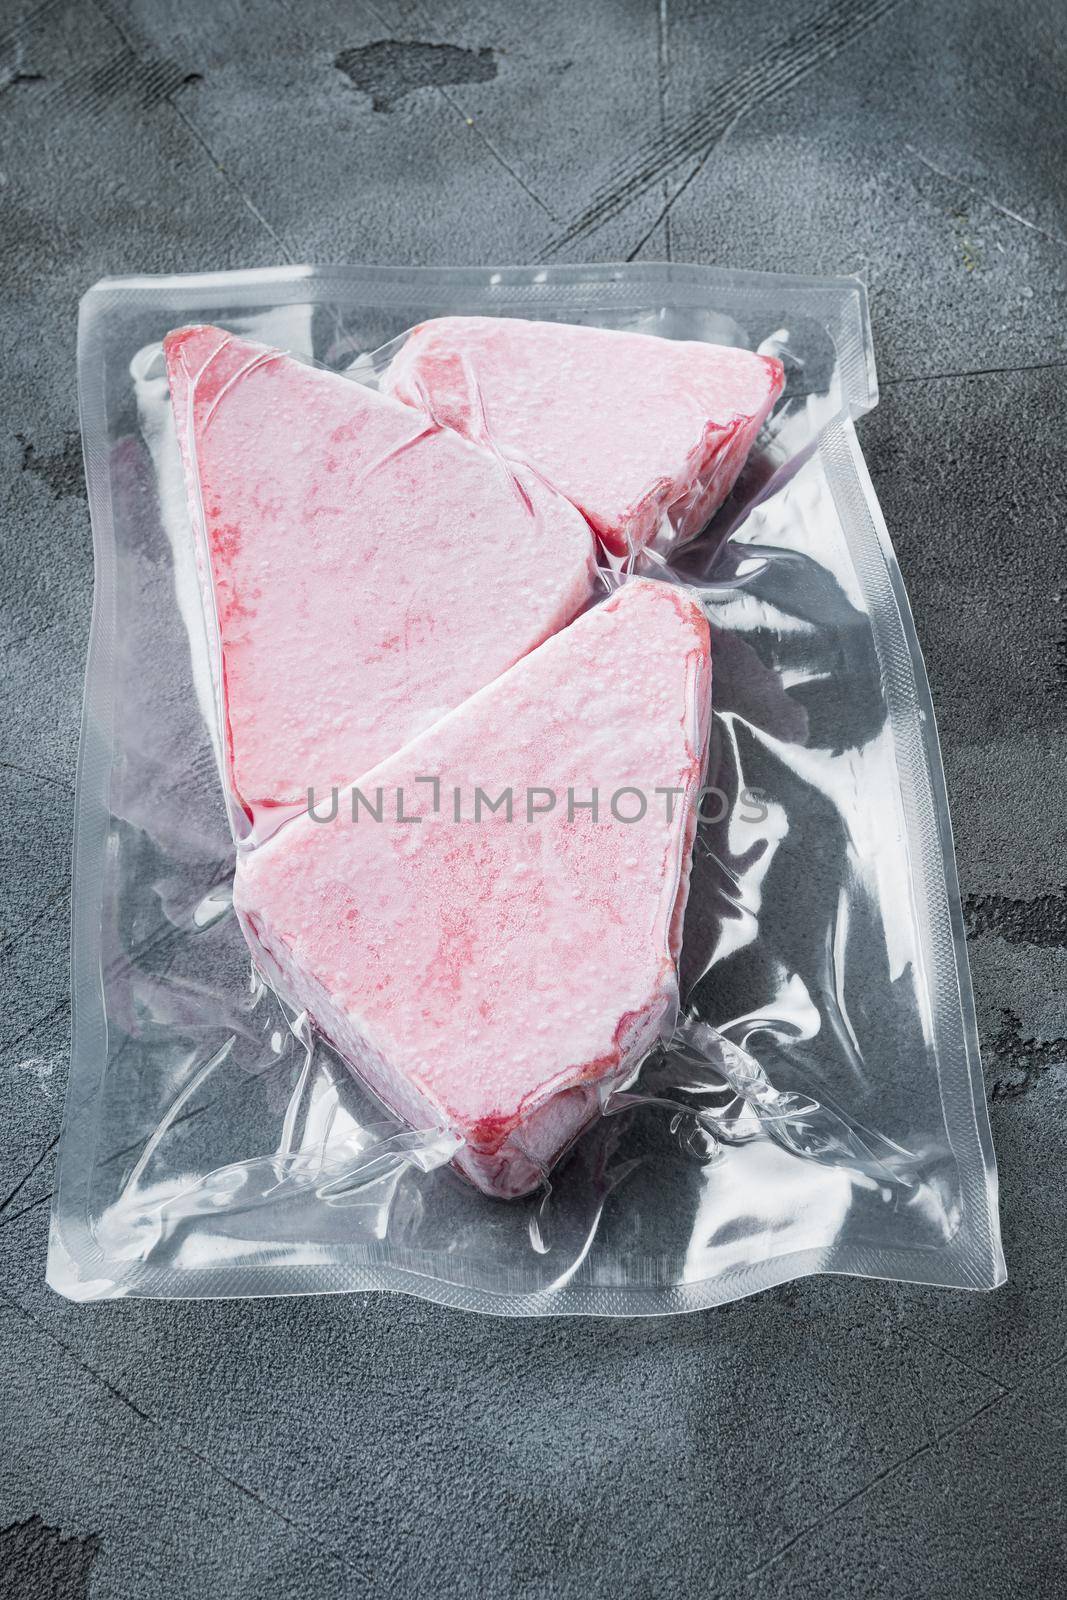 Frozen Tuna fish steak in a vacuum plastic package, on gray stone background by Ilianesolenyi